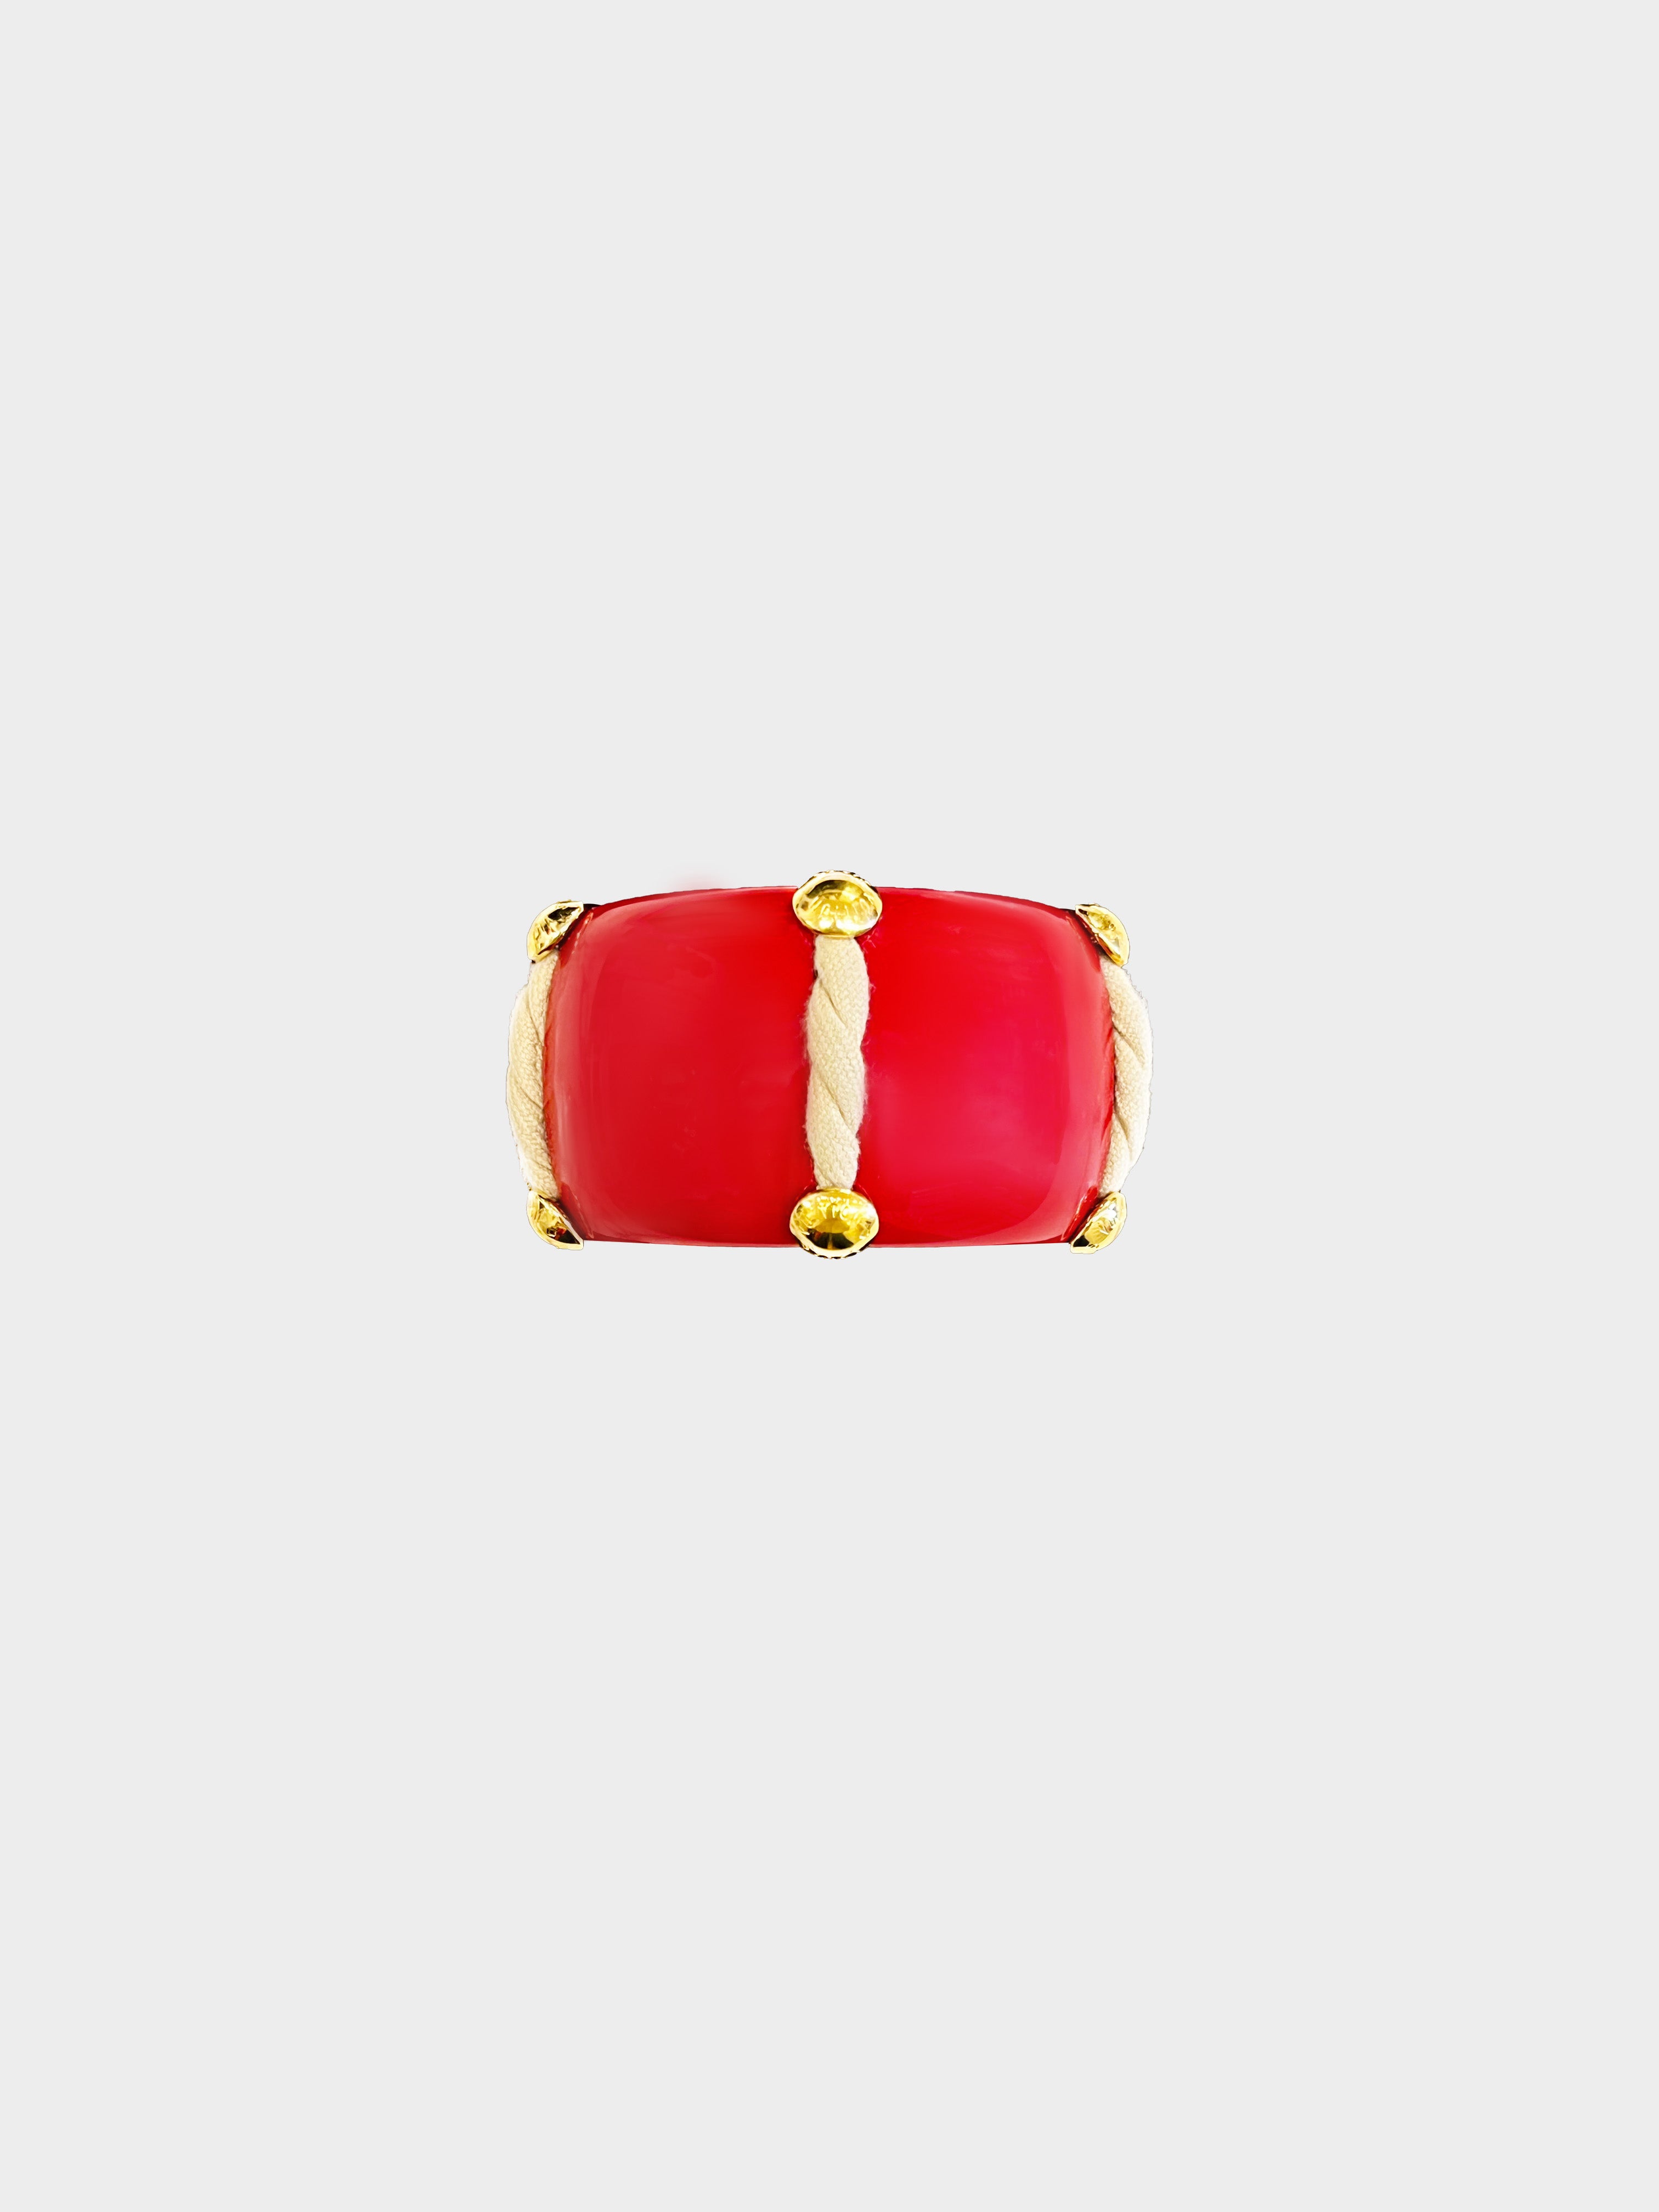 Louis Vuitton Cruise 2010 Red Shine Rope Bracelet · INTO